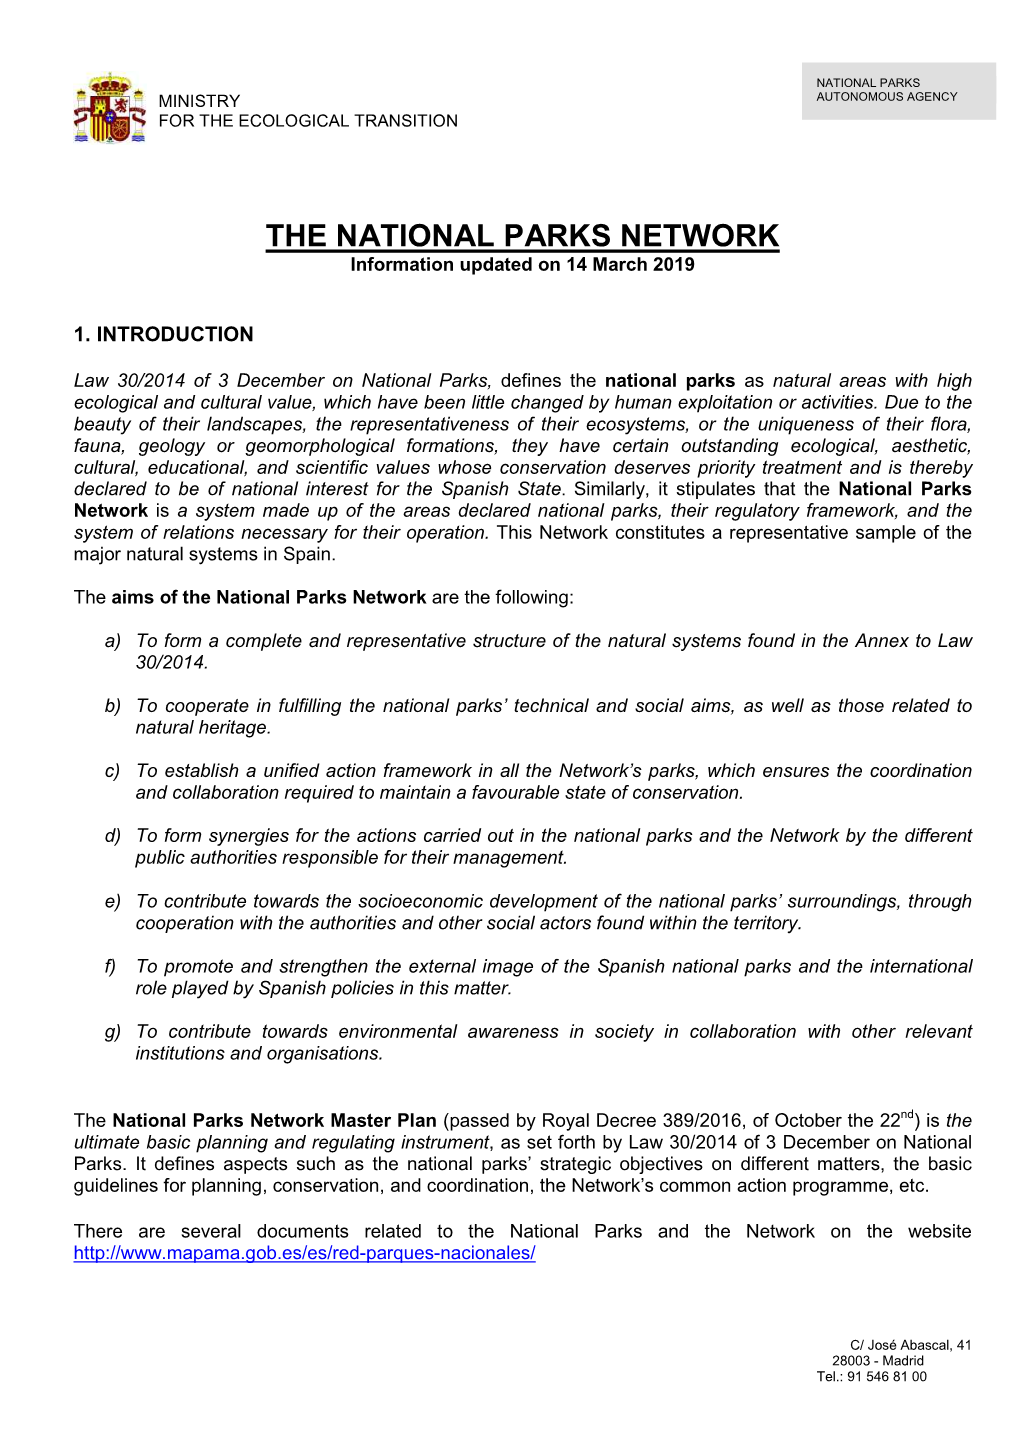 THE NATIONAL PARKS NETWORK Information Updated on 14 March 2019